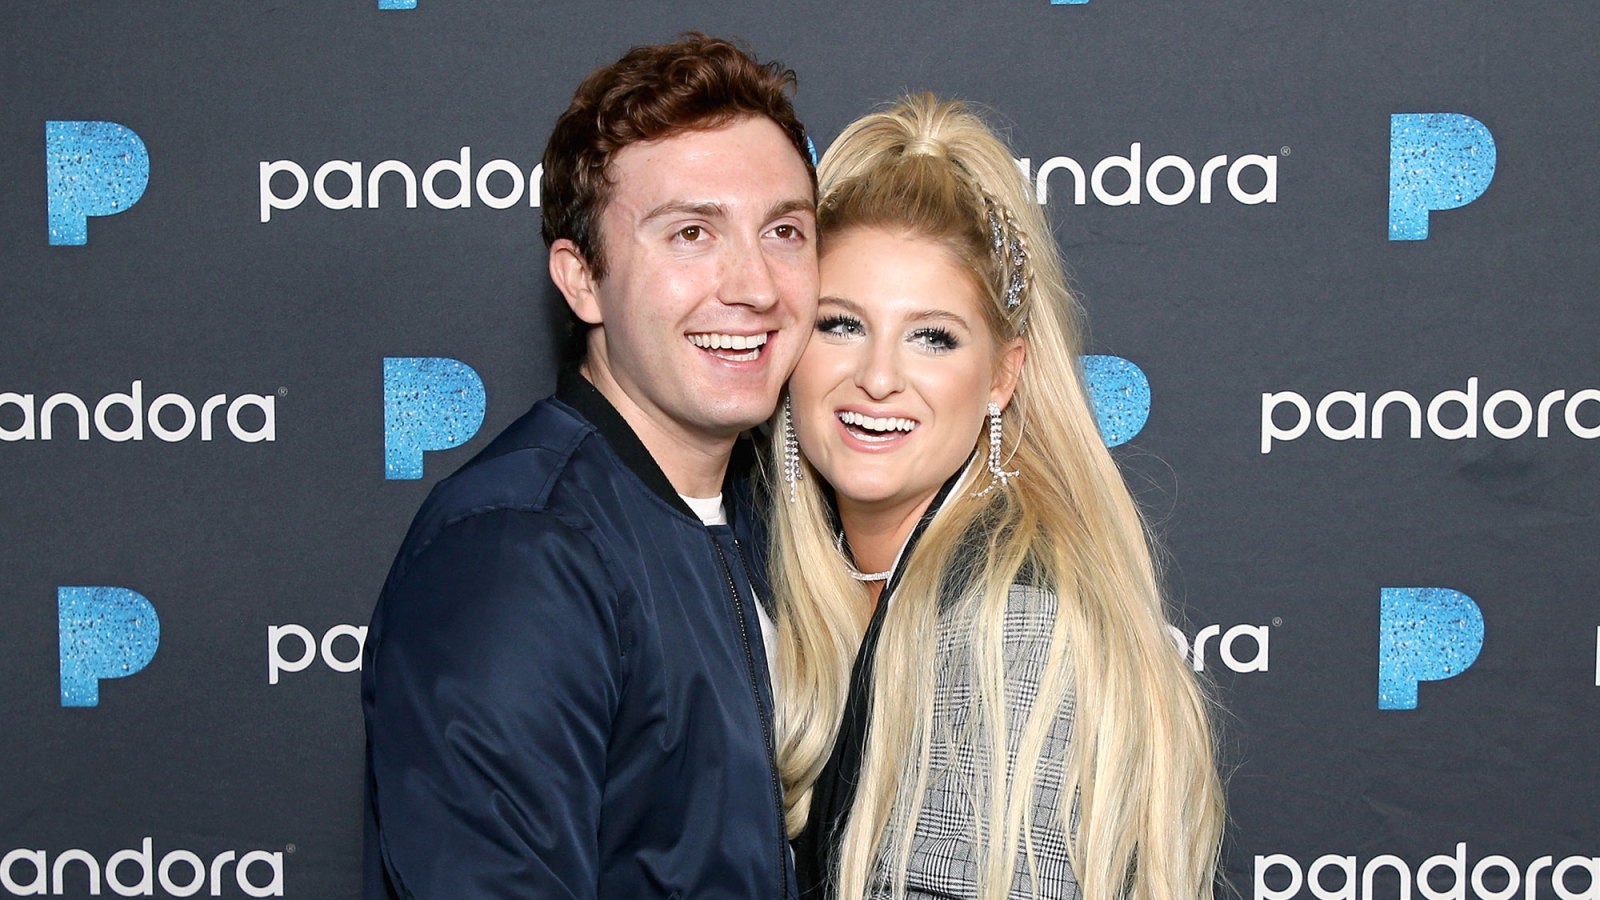 Daryl-Sabara-Is-Even-More-Lovey-Dovey-After-Wedding-to-Meghan-Trainor-1